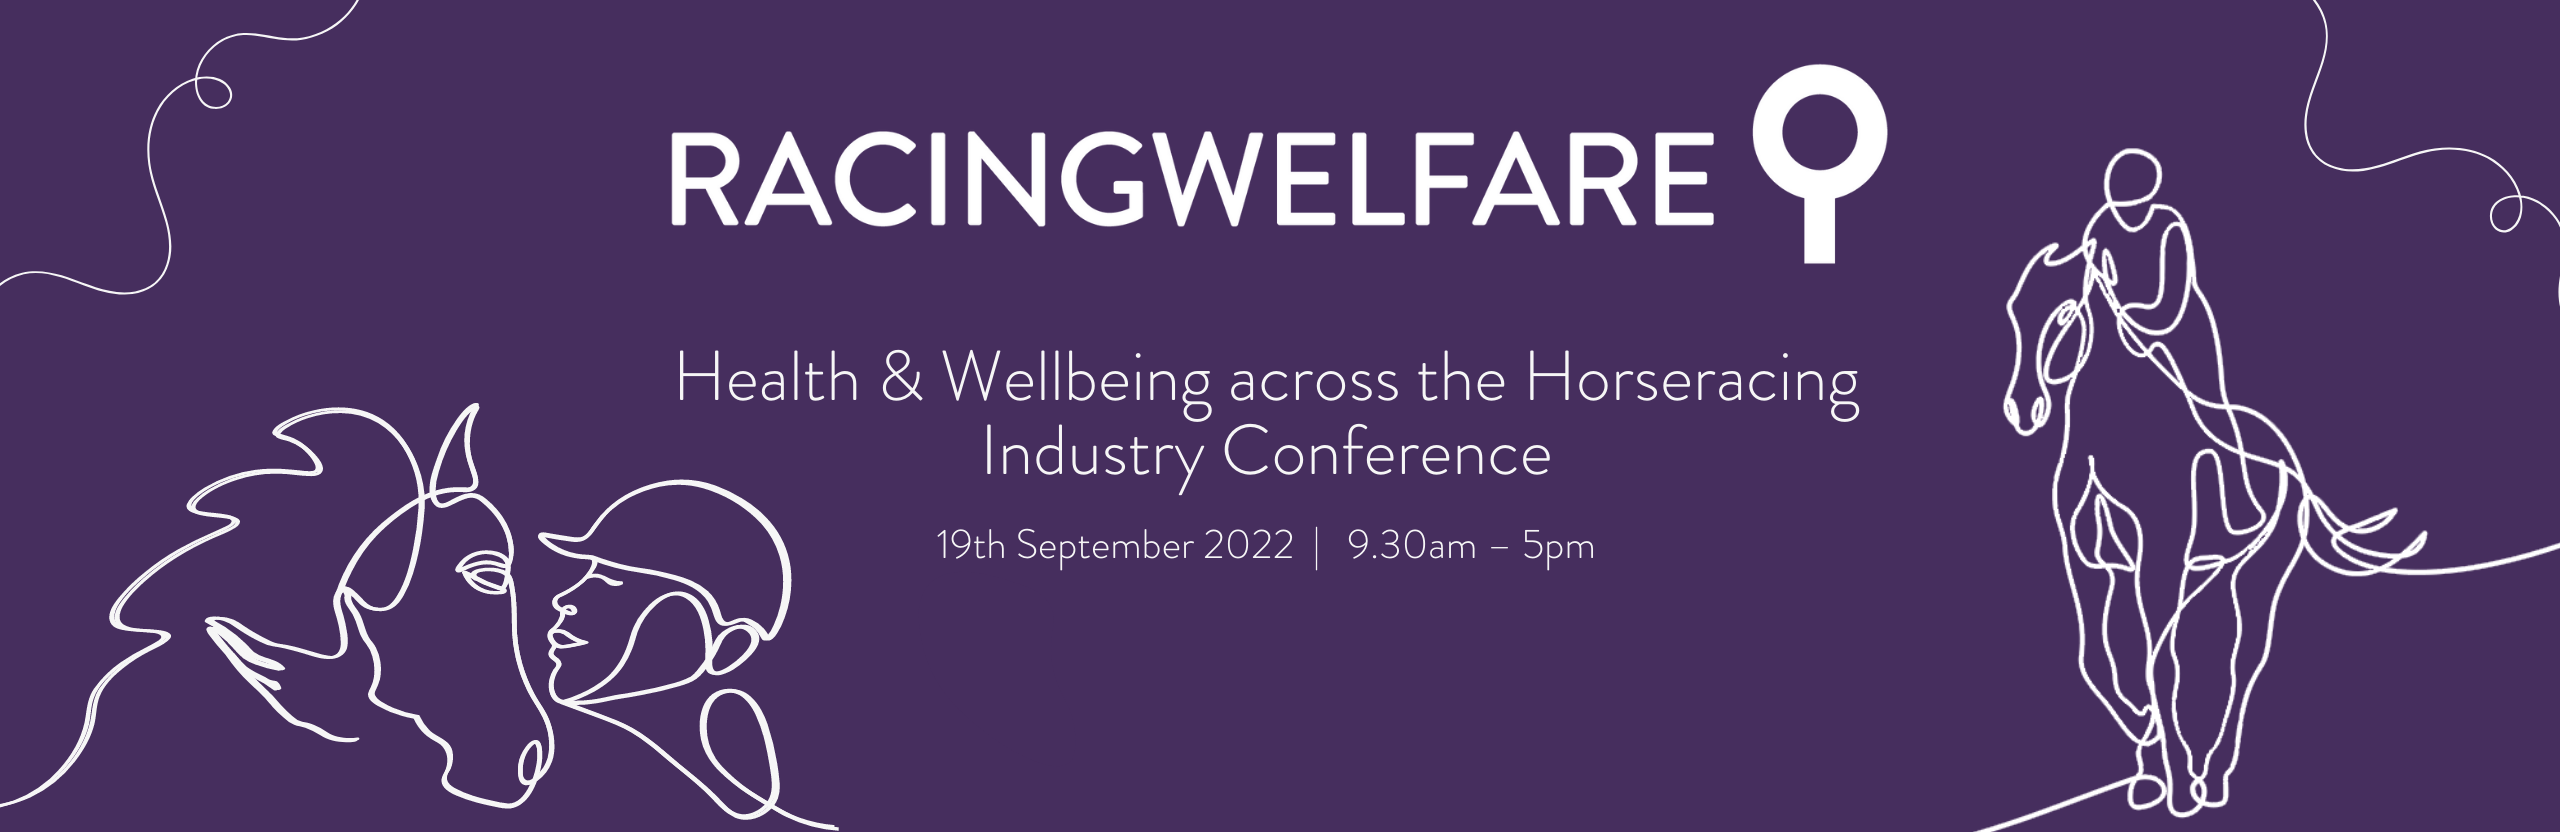 Health & Wellbeing across the Horseracing Industry Conference